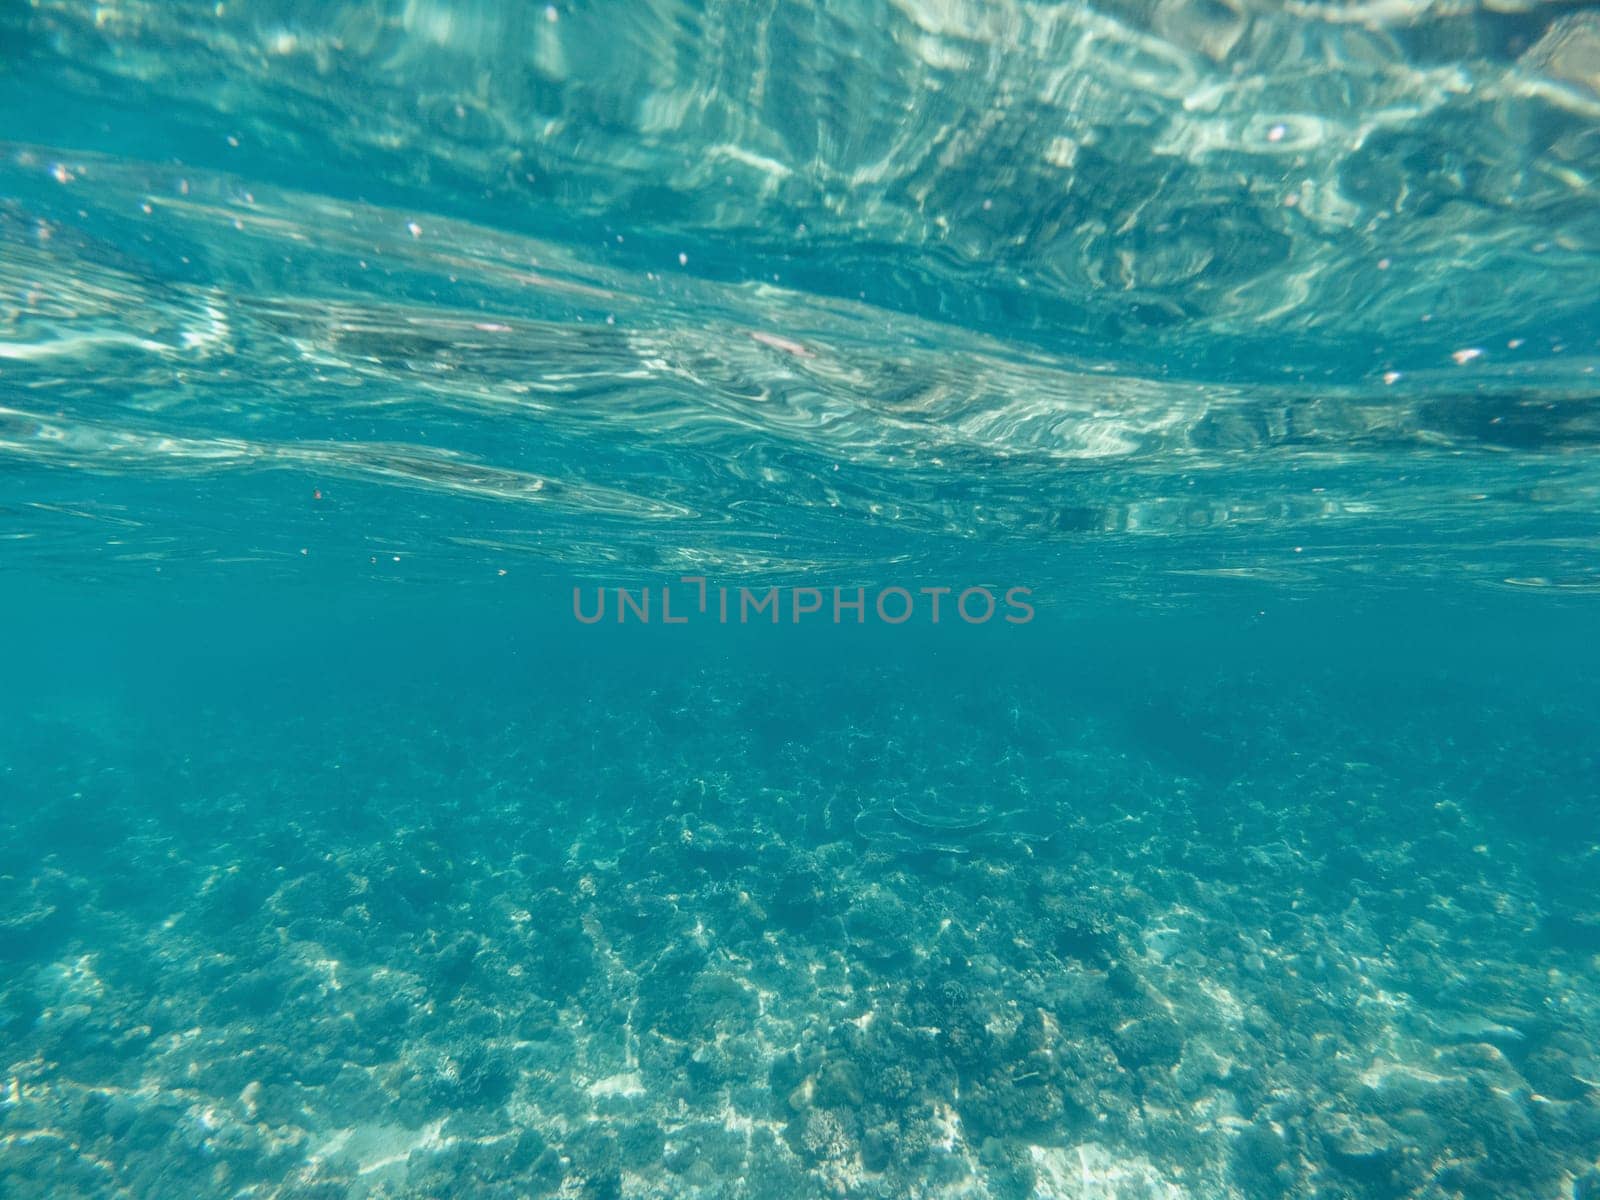 Underwater with sunlight pouring in, glistening water crests on white sand, and clear tropical waters. Underwater background of clear blue water on sandy sea floor